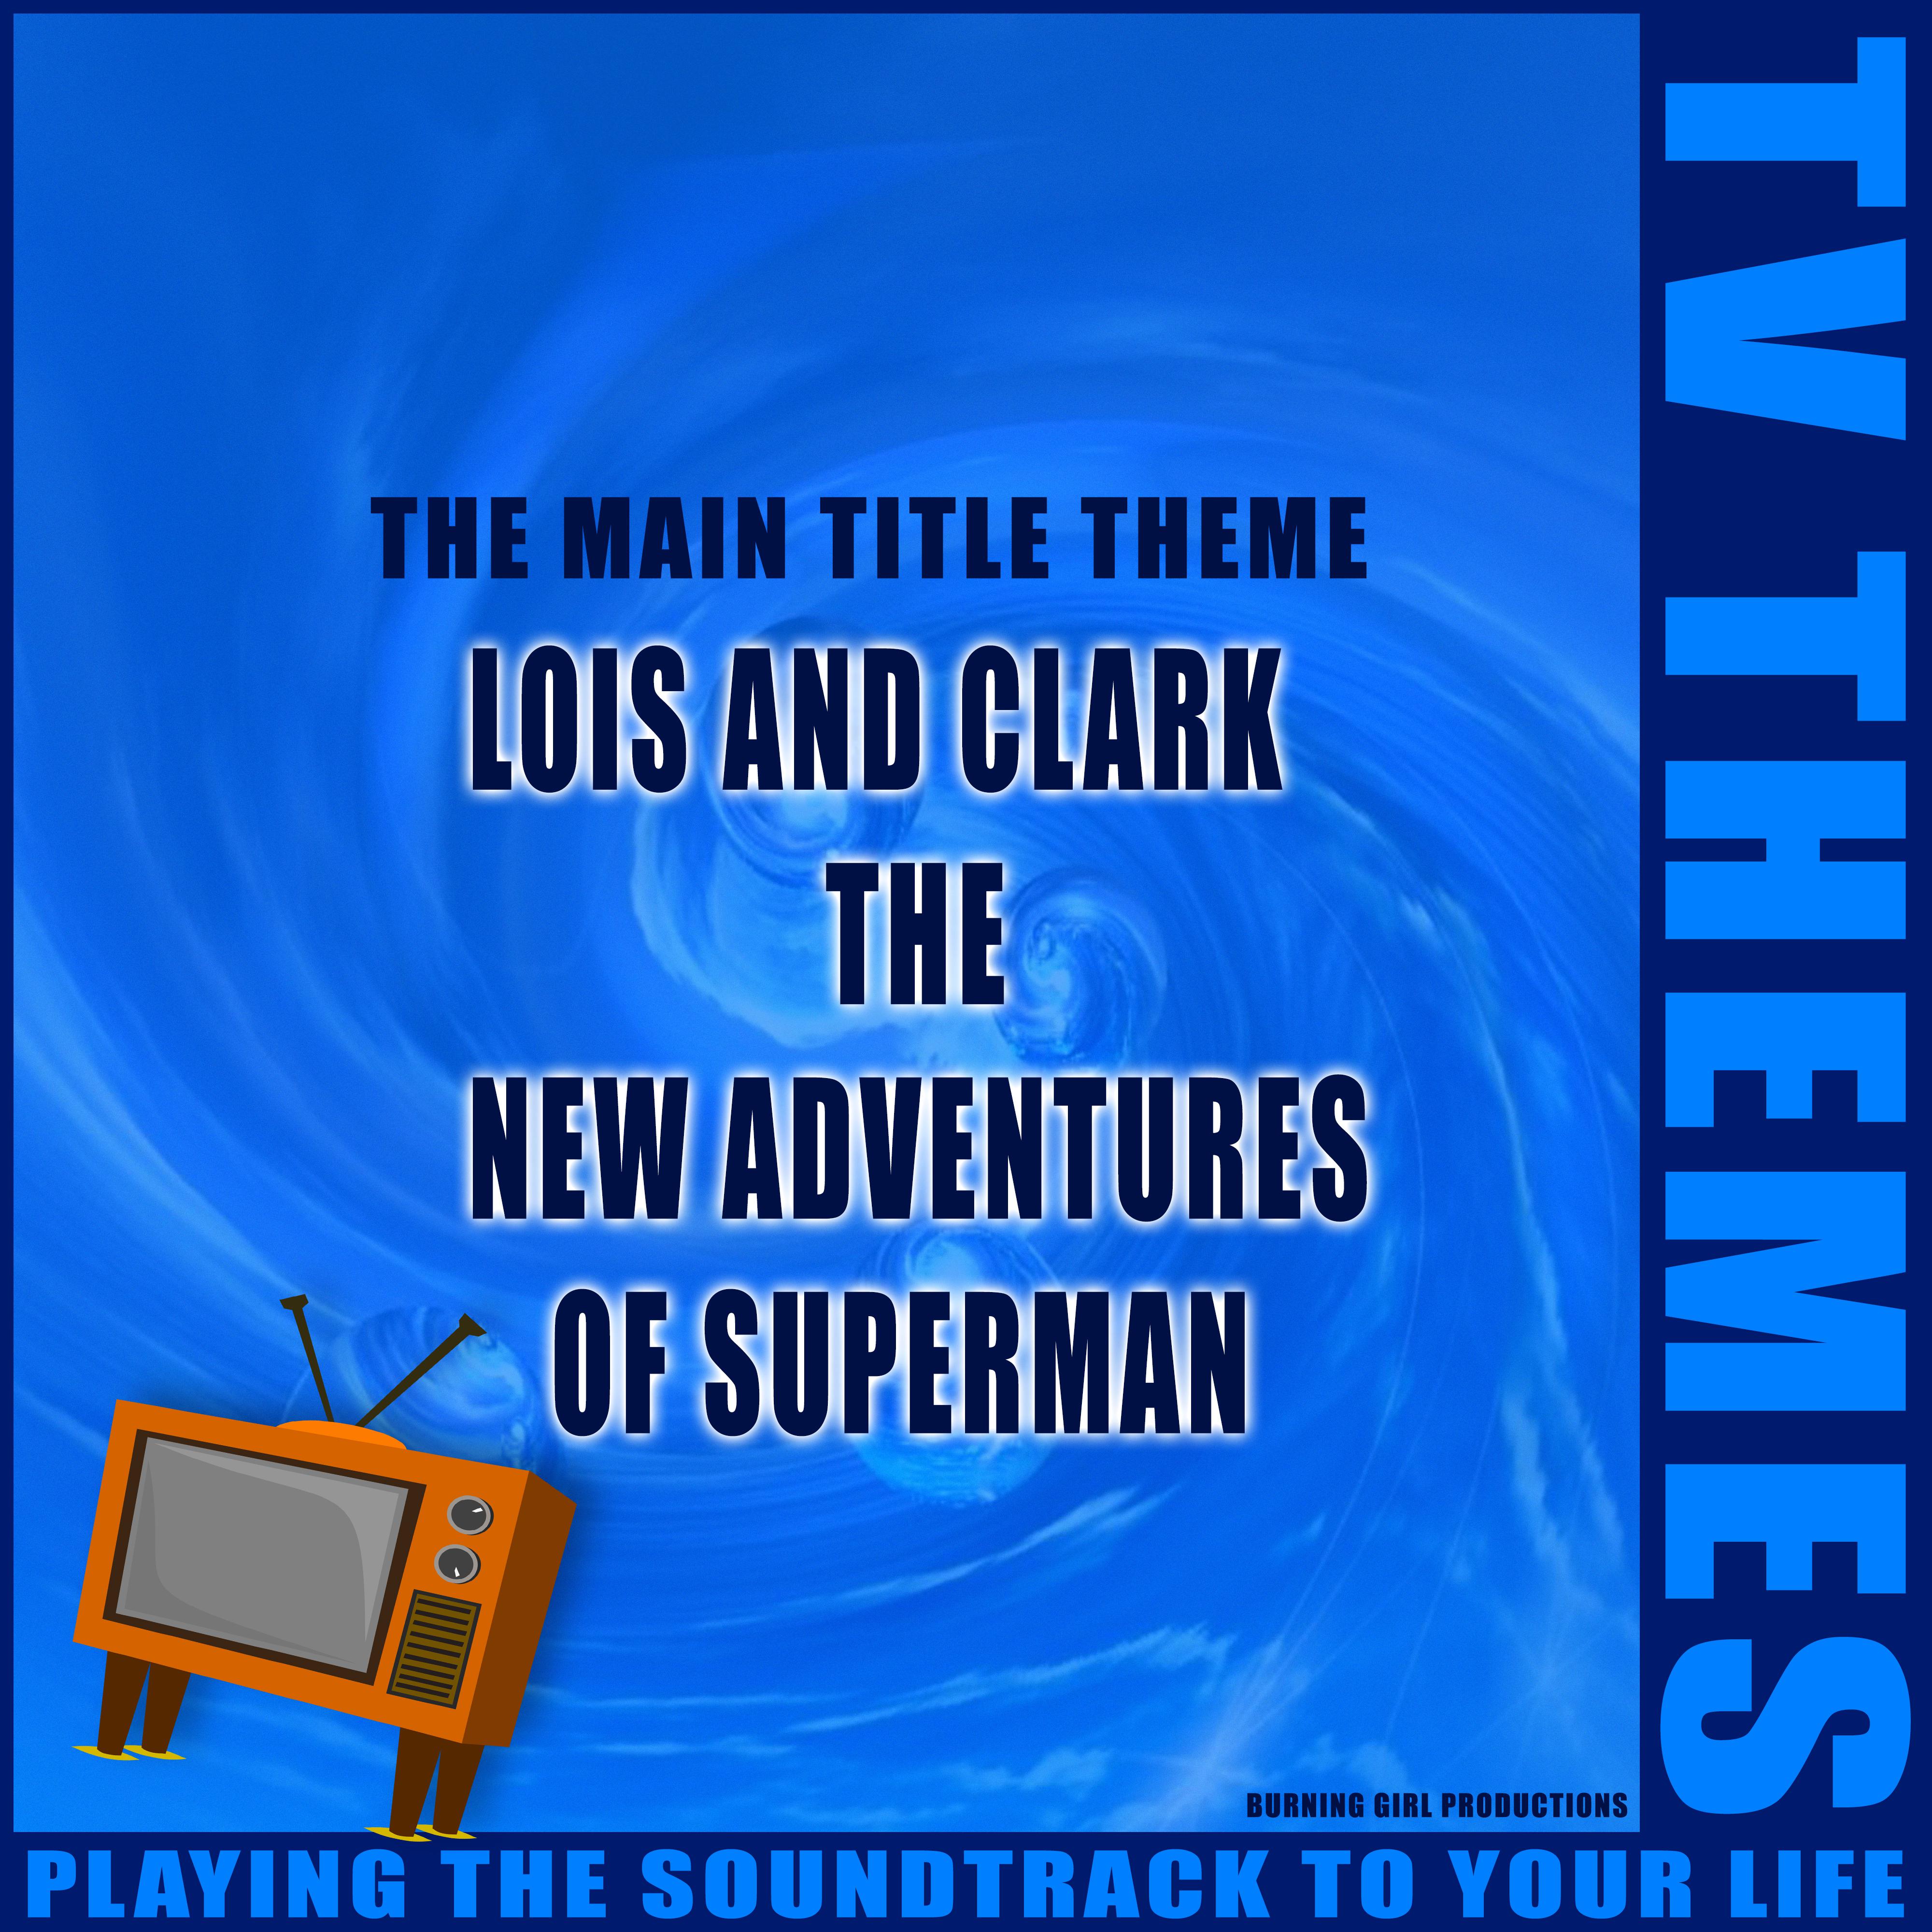 Lois and Clark The New Adventures of Superman - The Main Title Theme